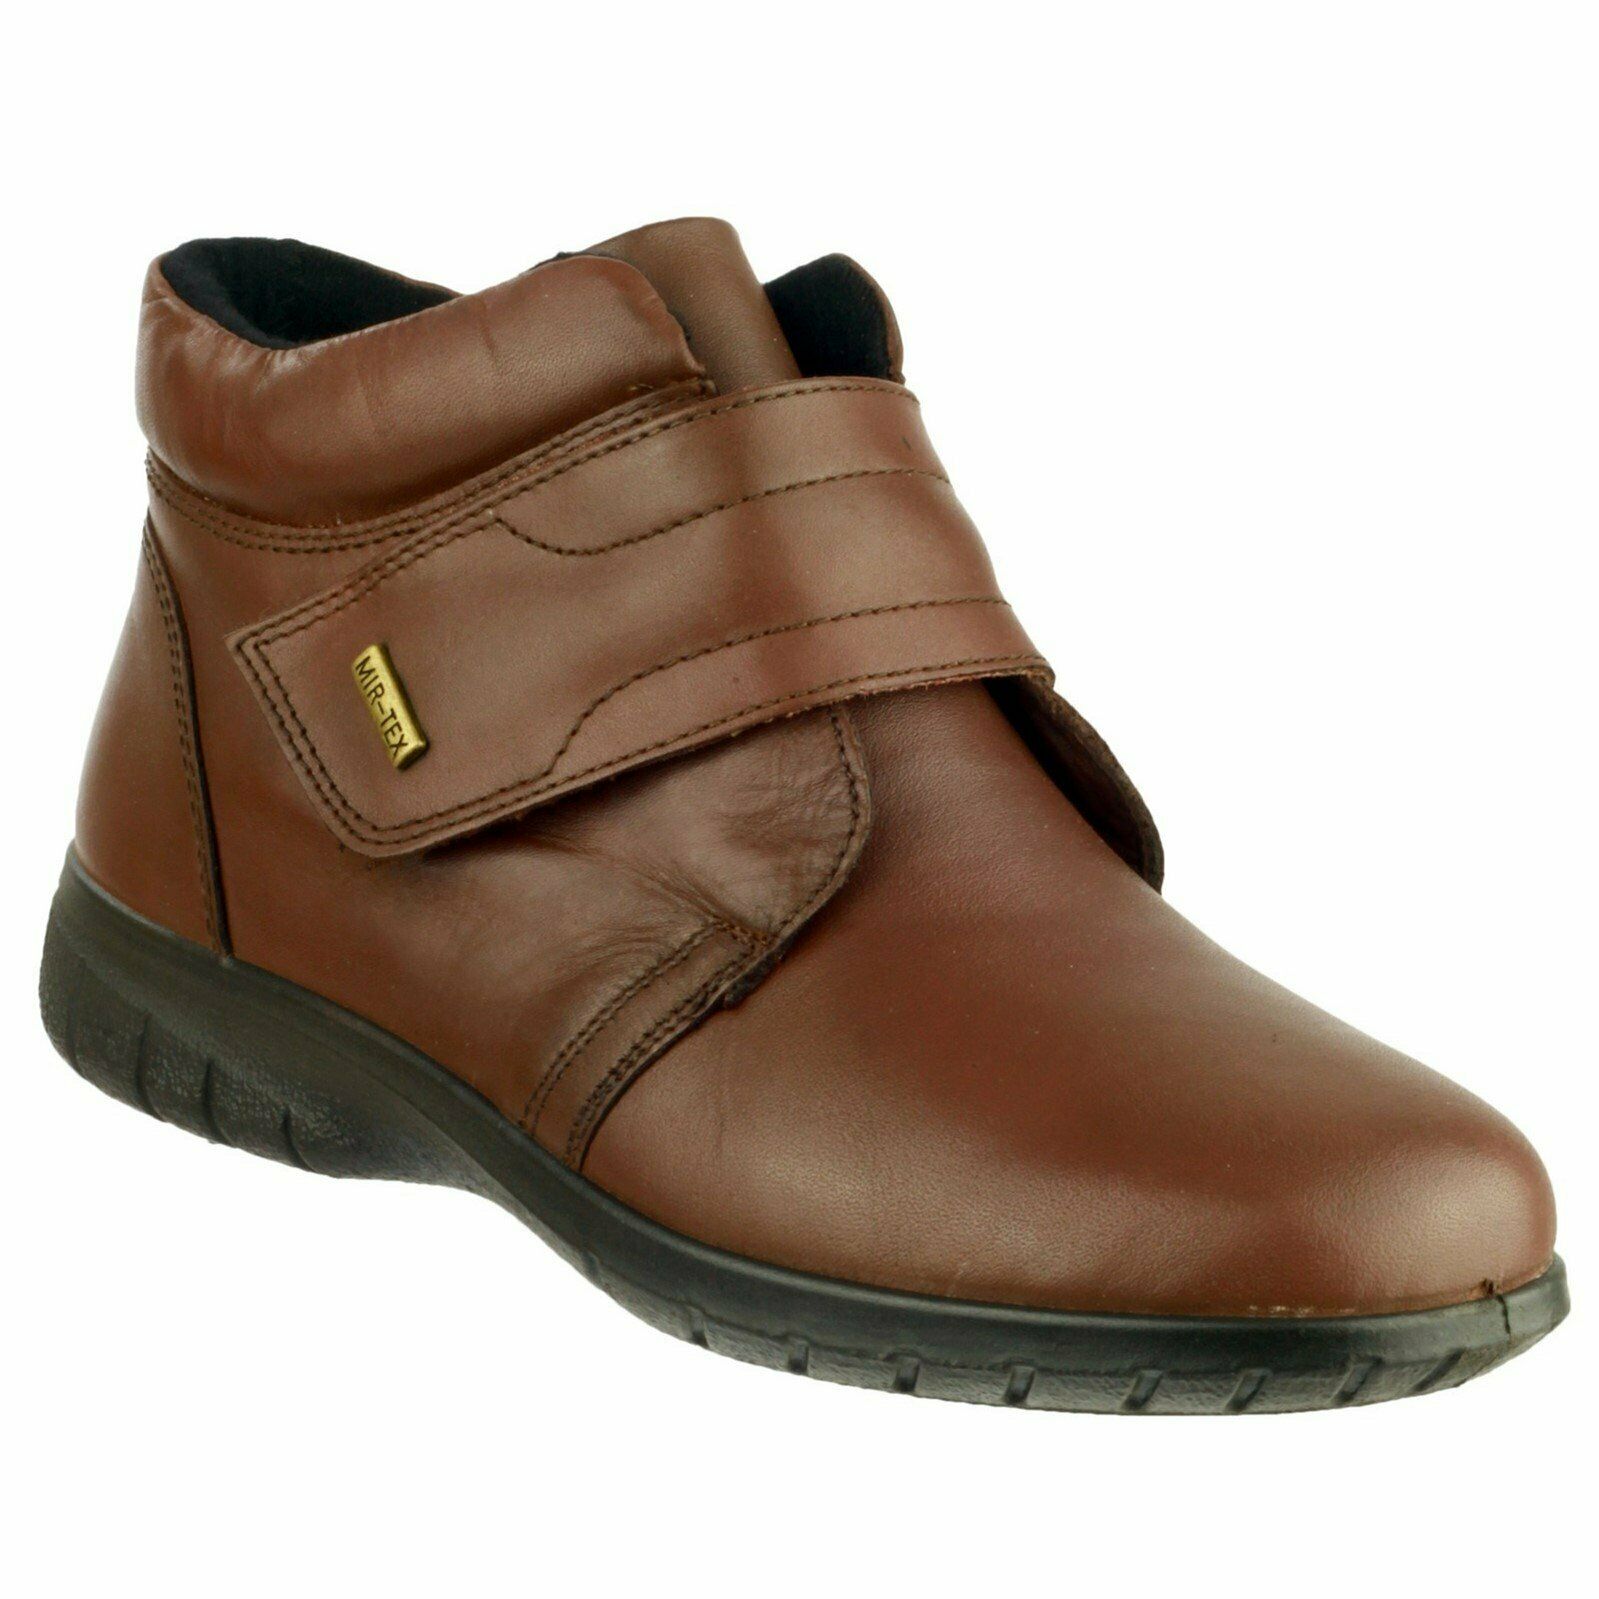 ladies ankle boots with velcro fastening